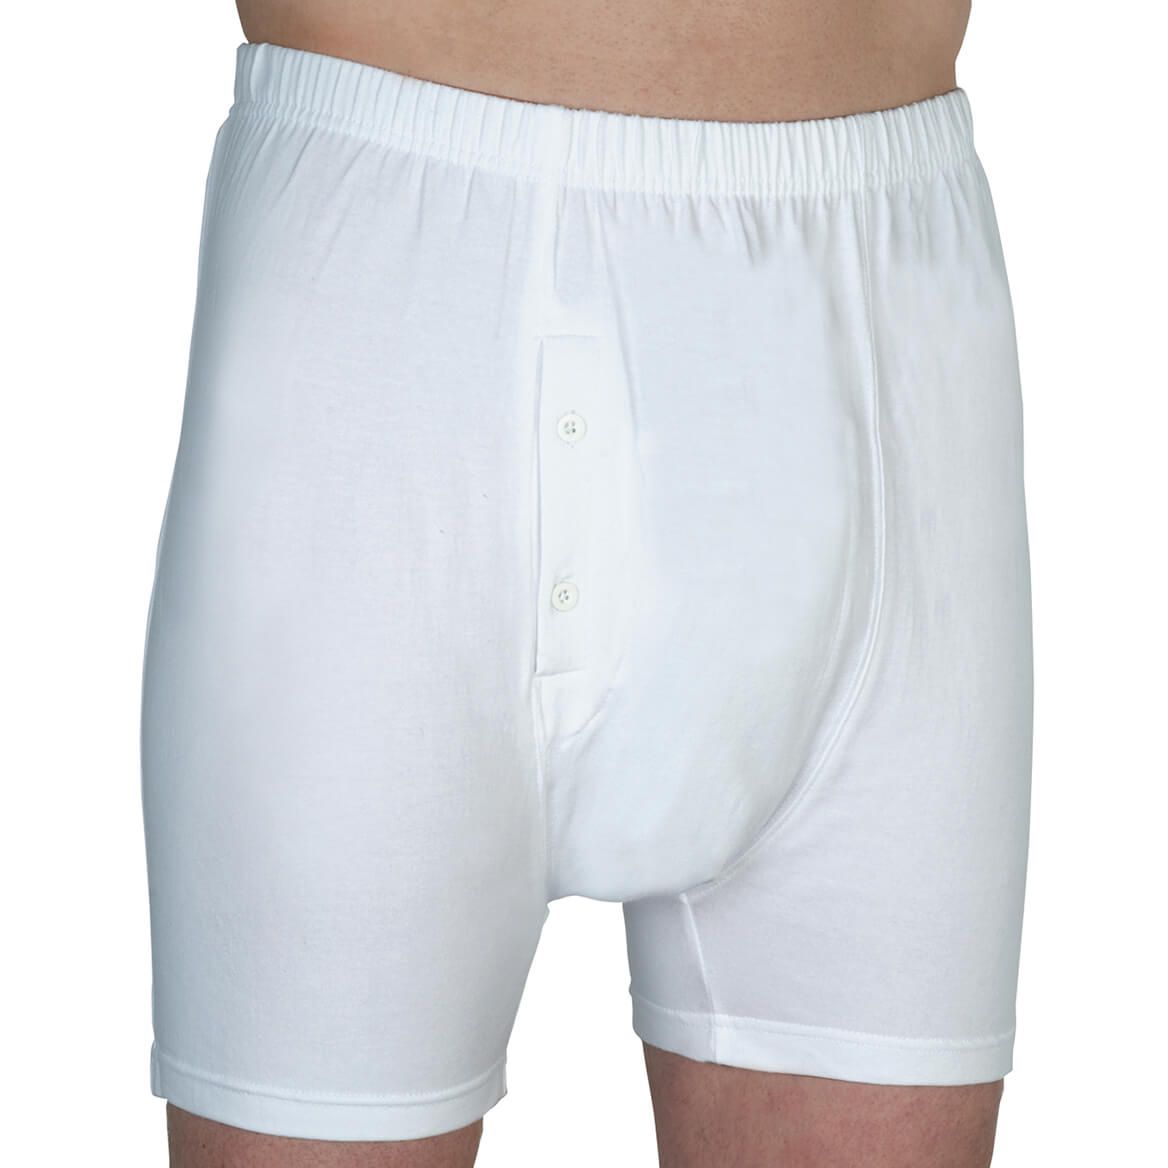 Incontinence Boxer Brief 1 Pair + '-' + 370078